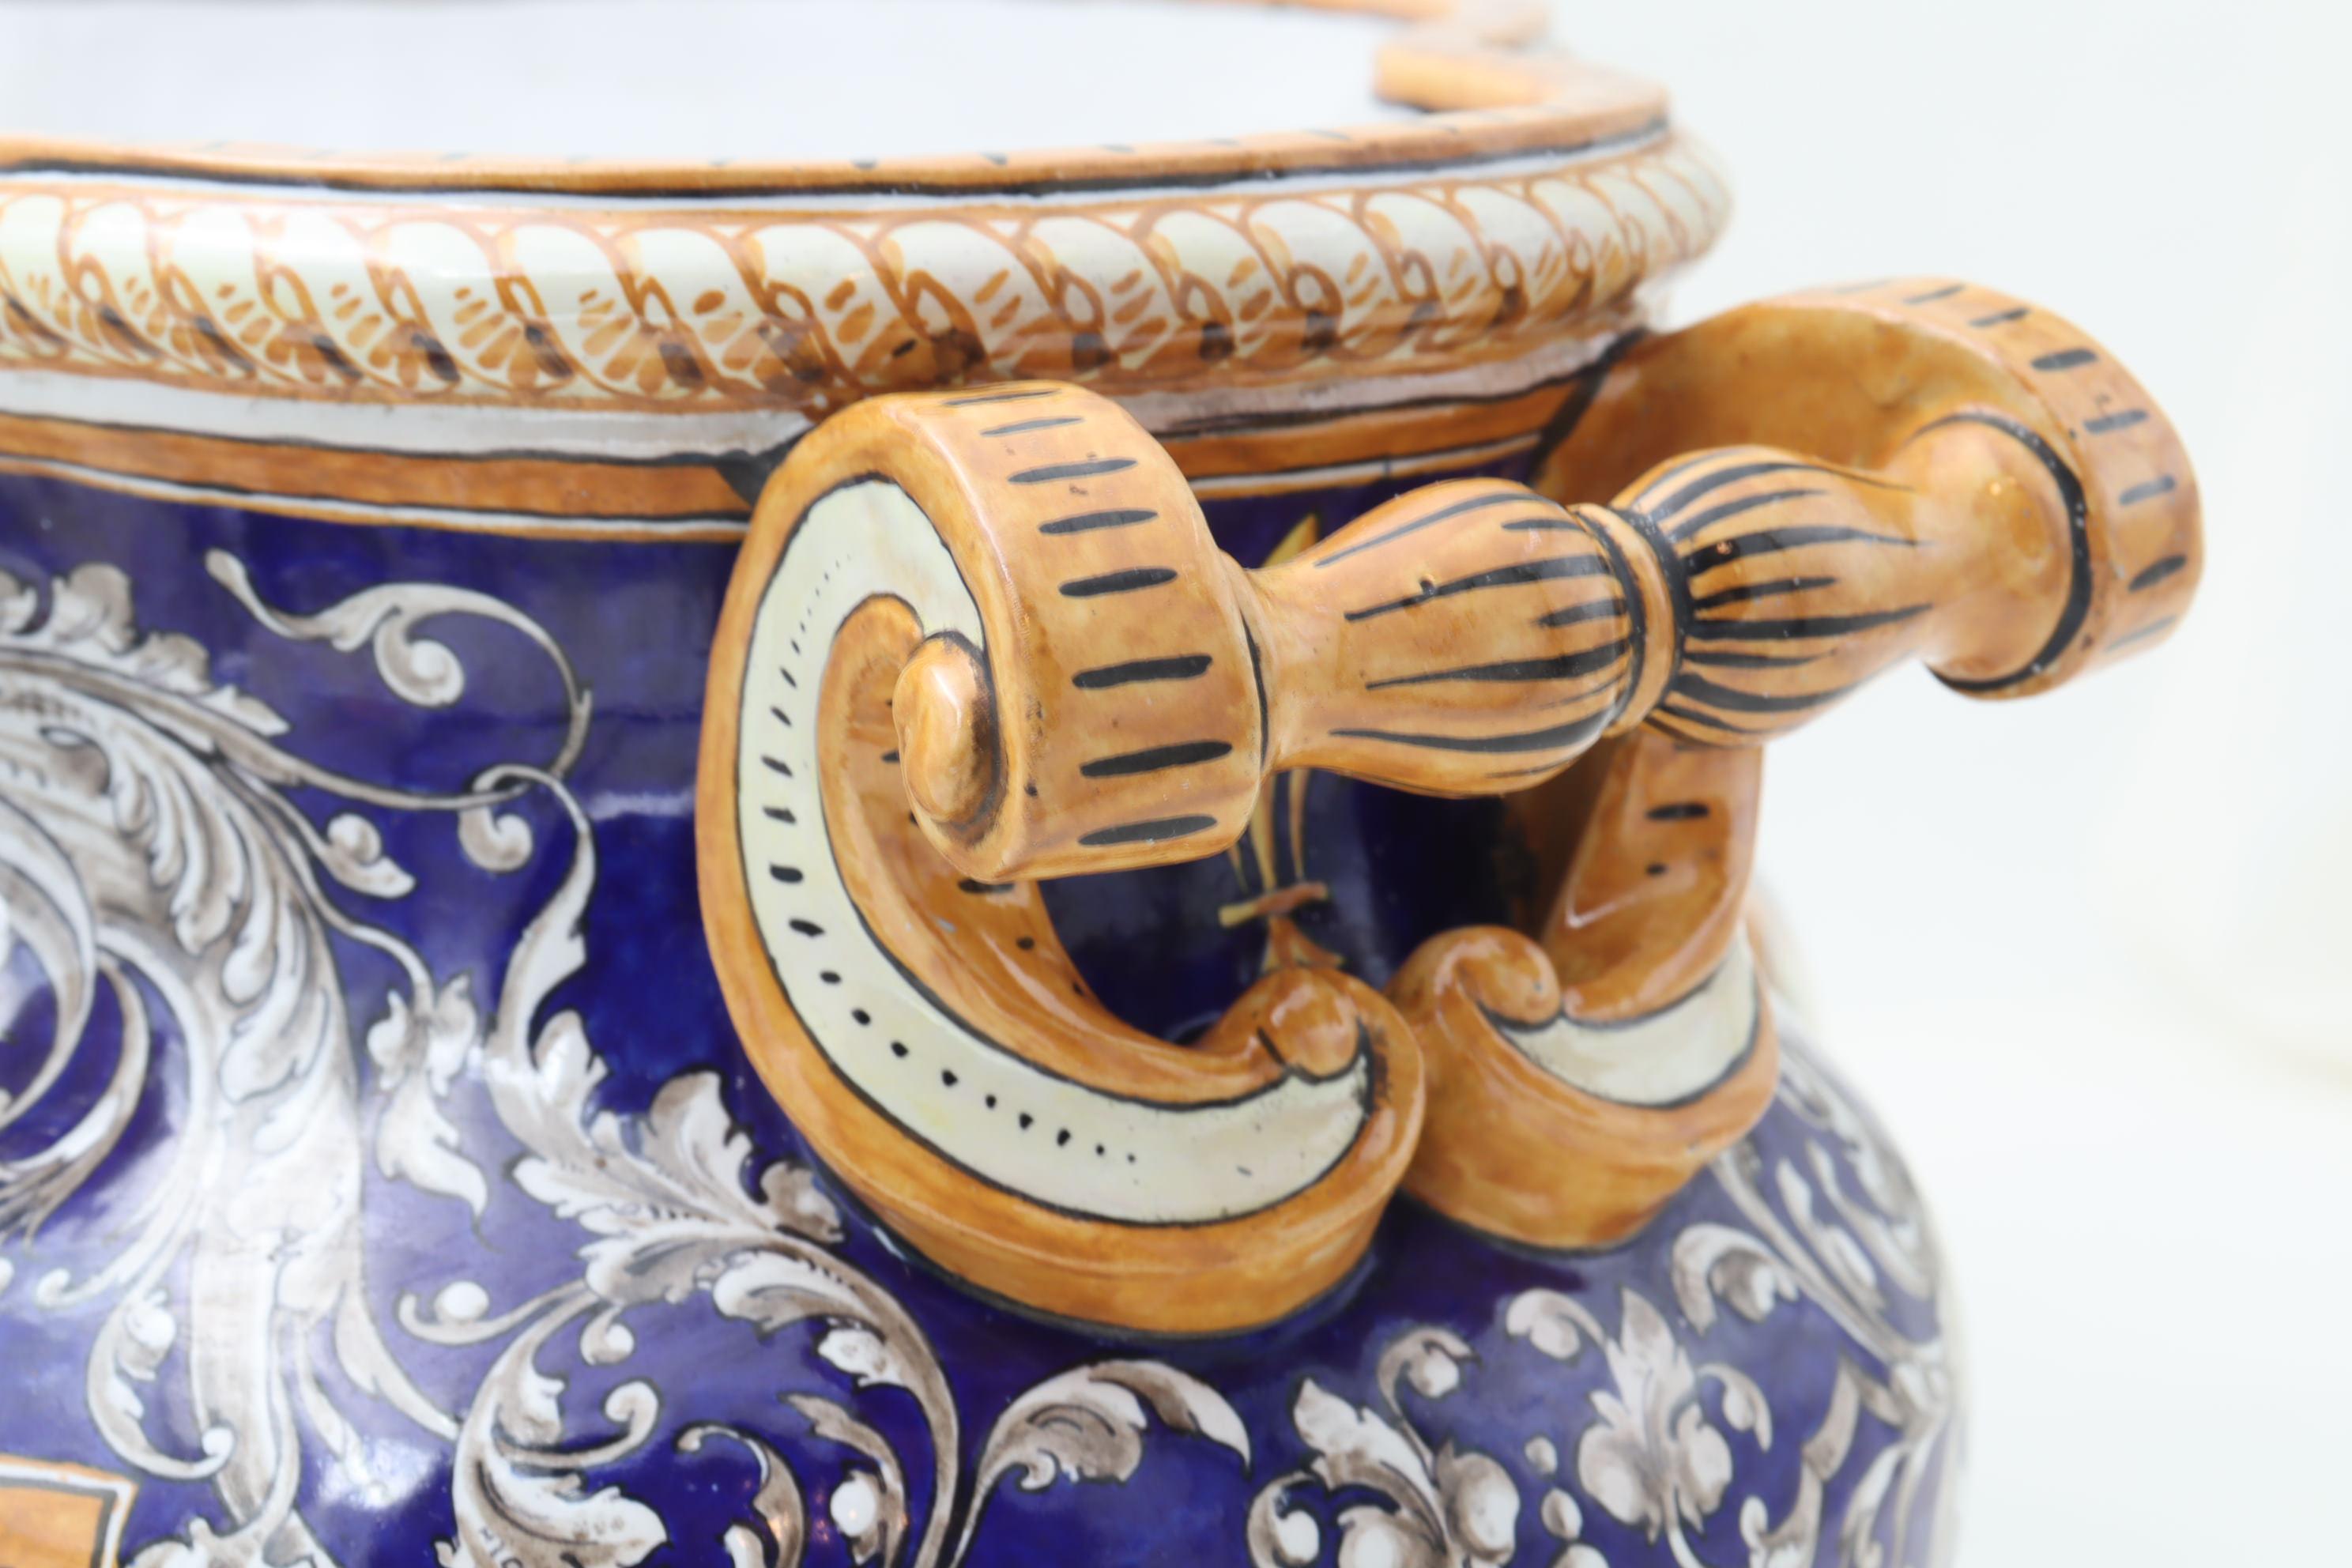 Hand Painted Jardiniere by Ulysse Besnard of Blois In Good Condition For Sale In East Geelong, VIC